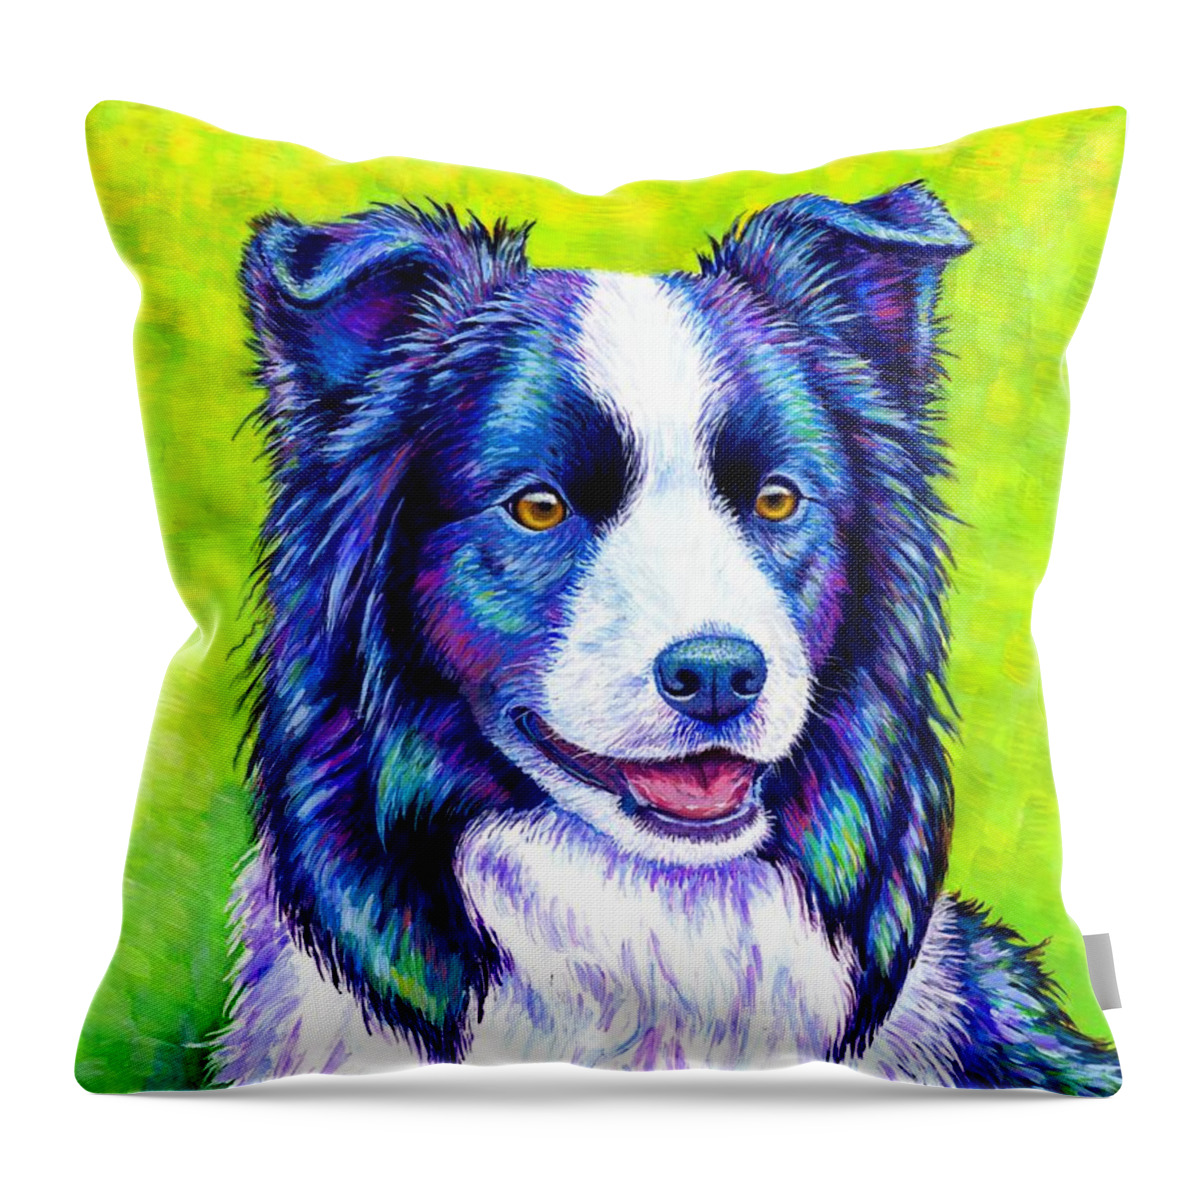 Border Collie Throw Pillow featuring the painting Watchful Eye - Colorful Border Collie Dog by Rebecca Wang